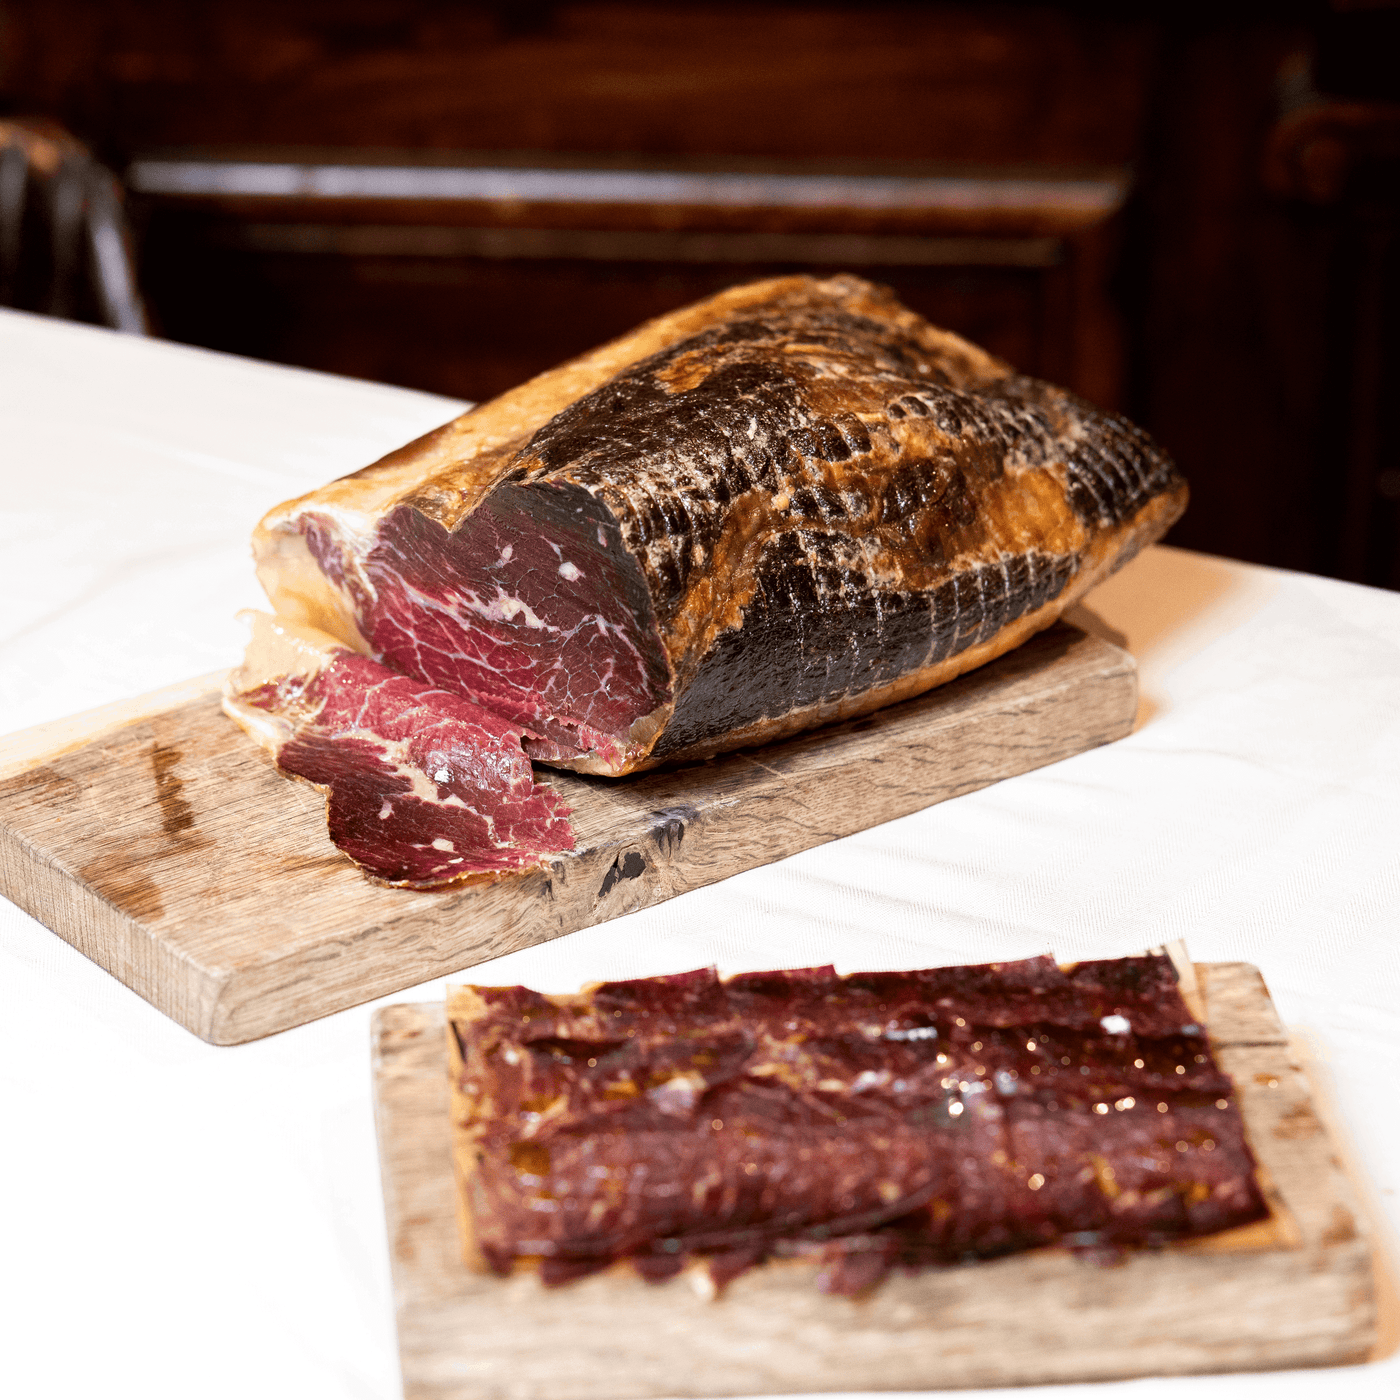 IGP León Cecina - Air cured beef from 100g